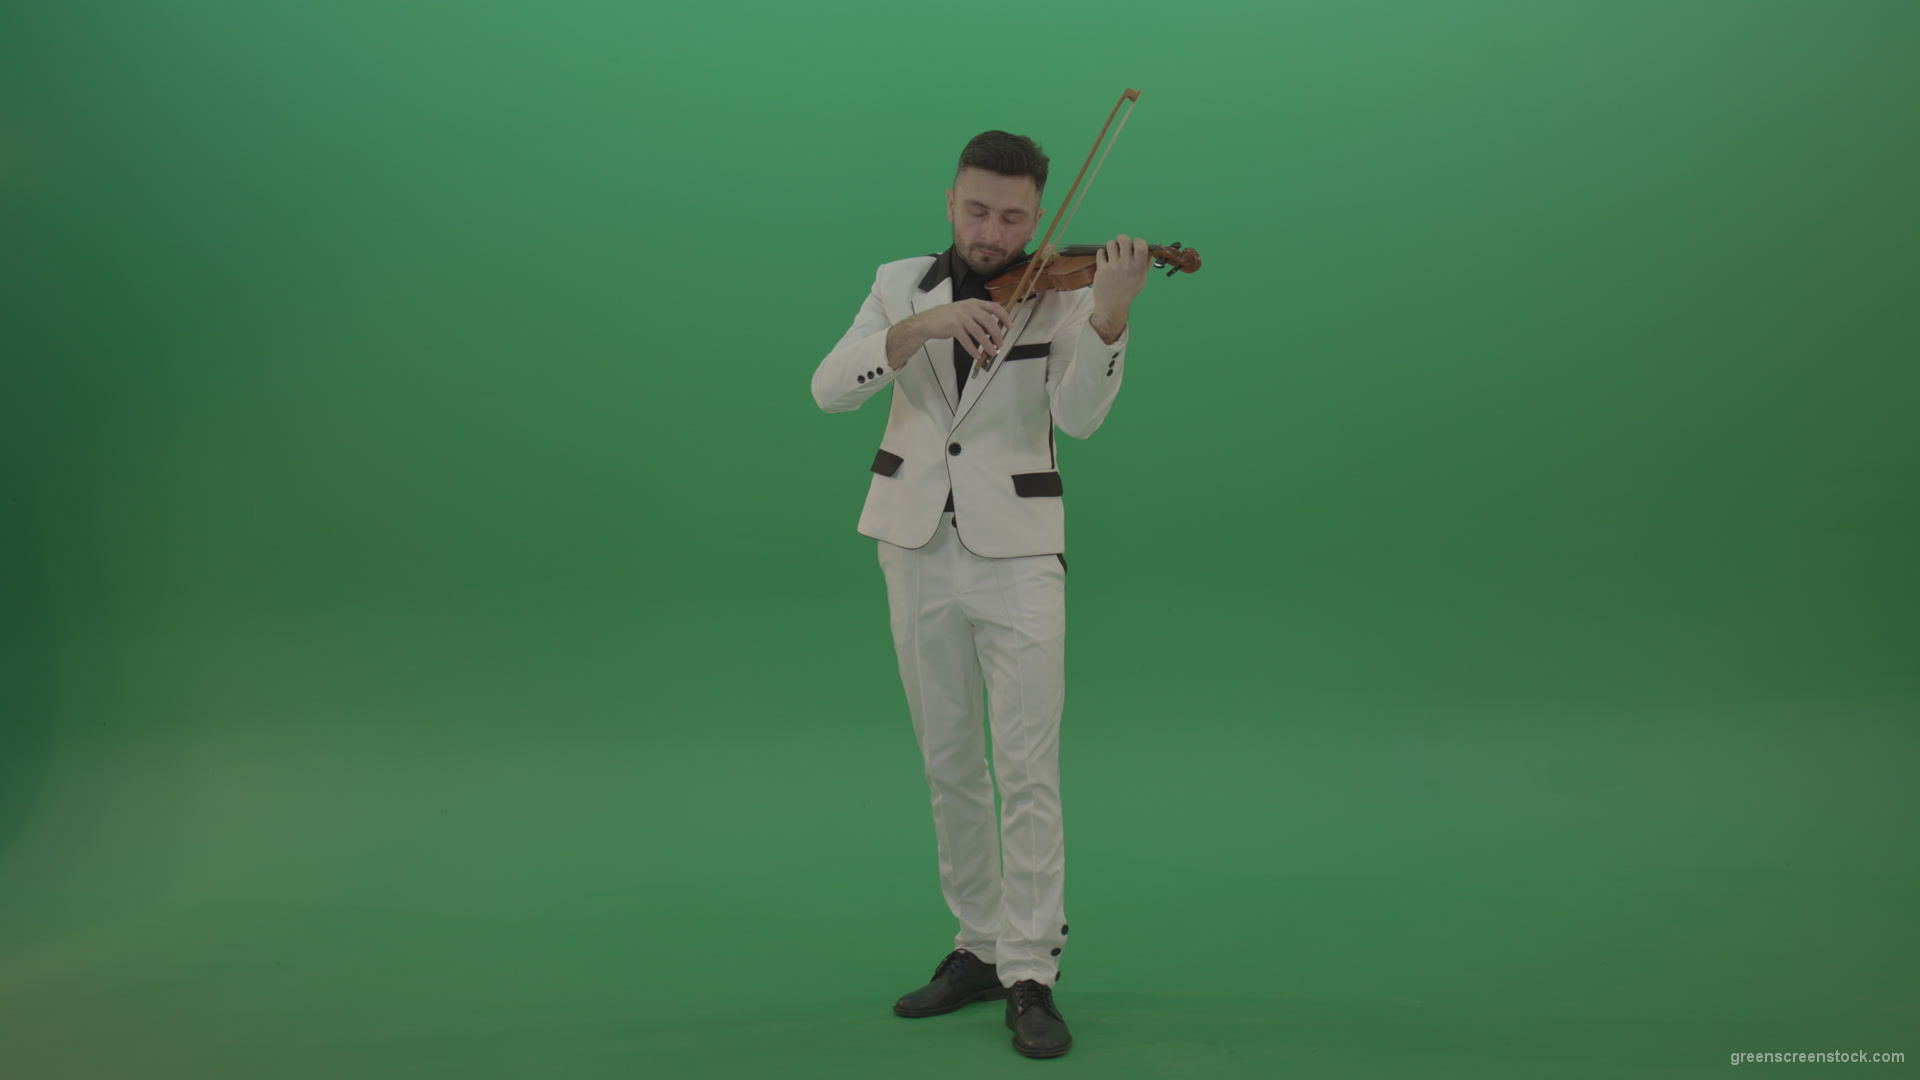 Classic-music-Man-in-white-costume-and-eyes-in-black-mask-play-gothic-violin-Fiddle-string-music-instrument-isolated-on-green-screen_001 Green Screen Stock